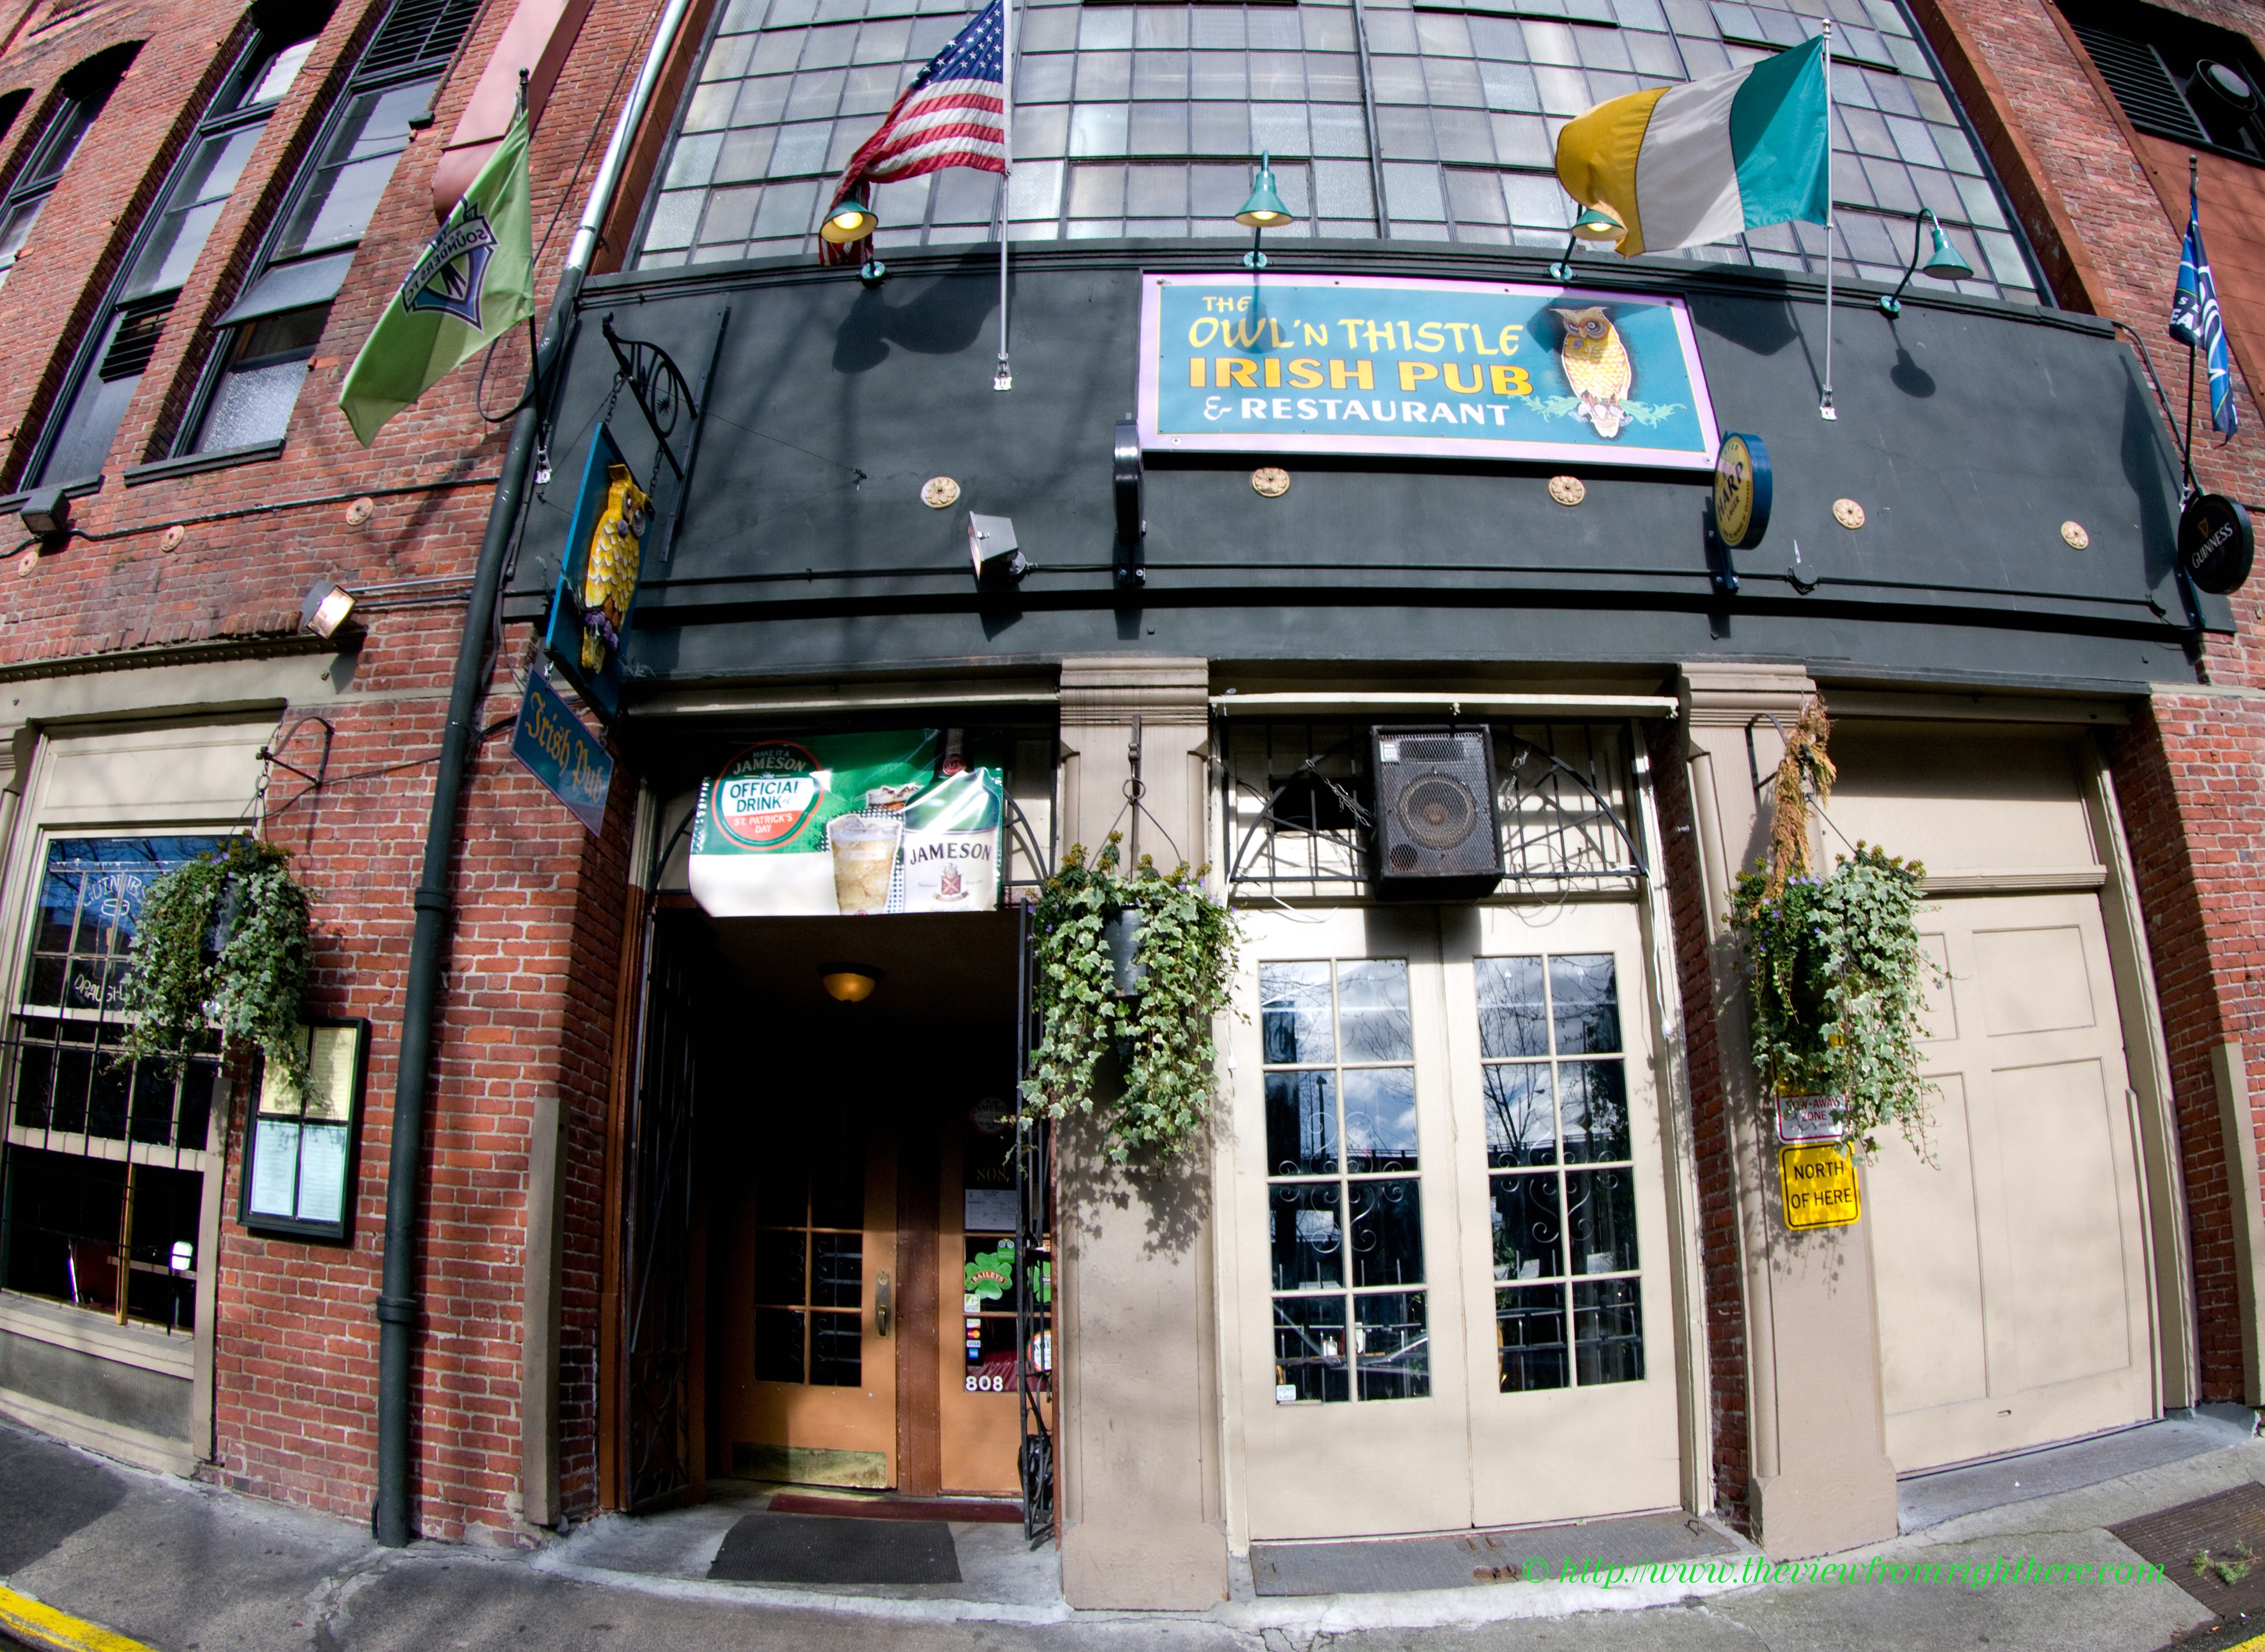 The Owl and Thistle Irish Pub and Restaurant – Happy St. Patrick’s Day